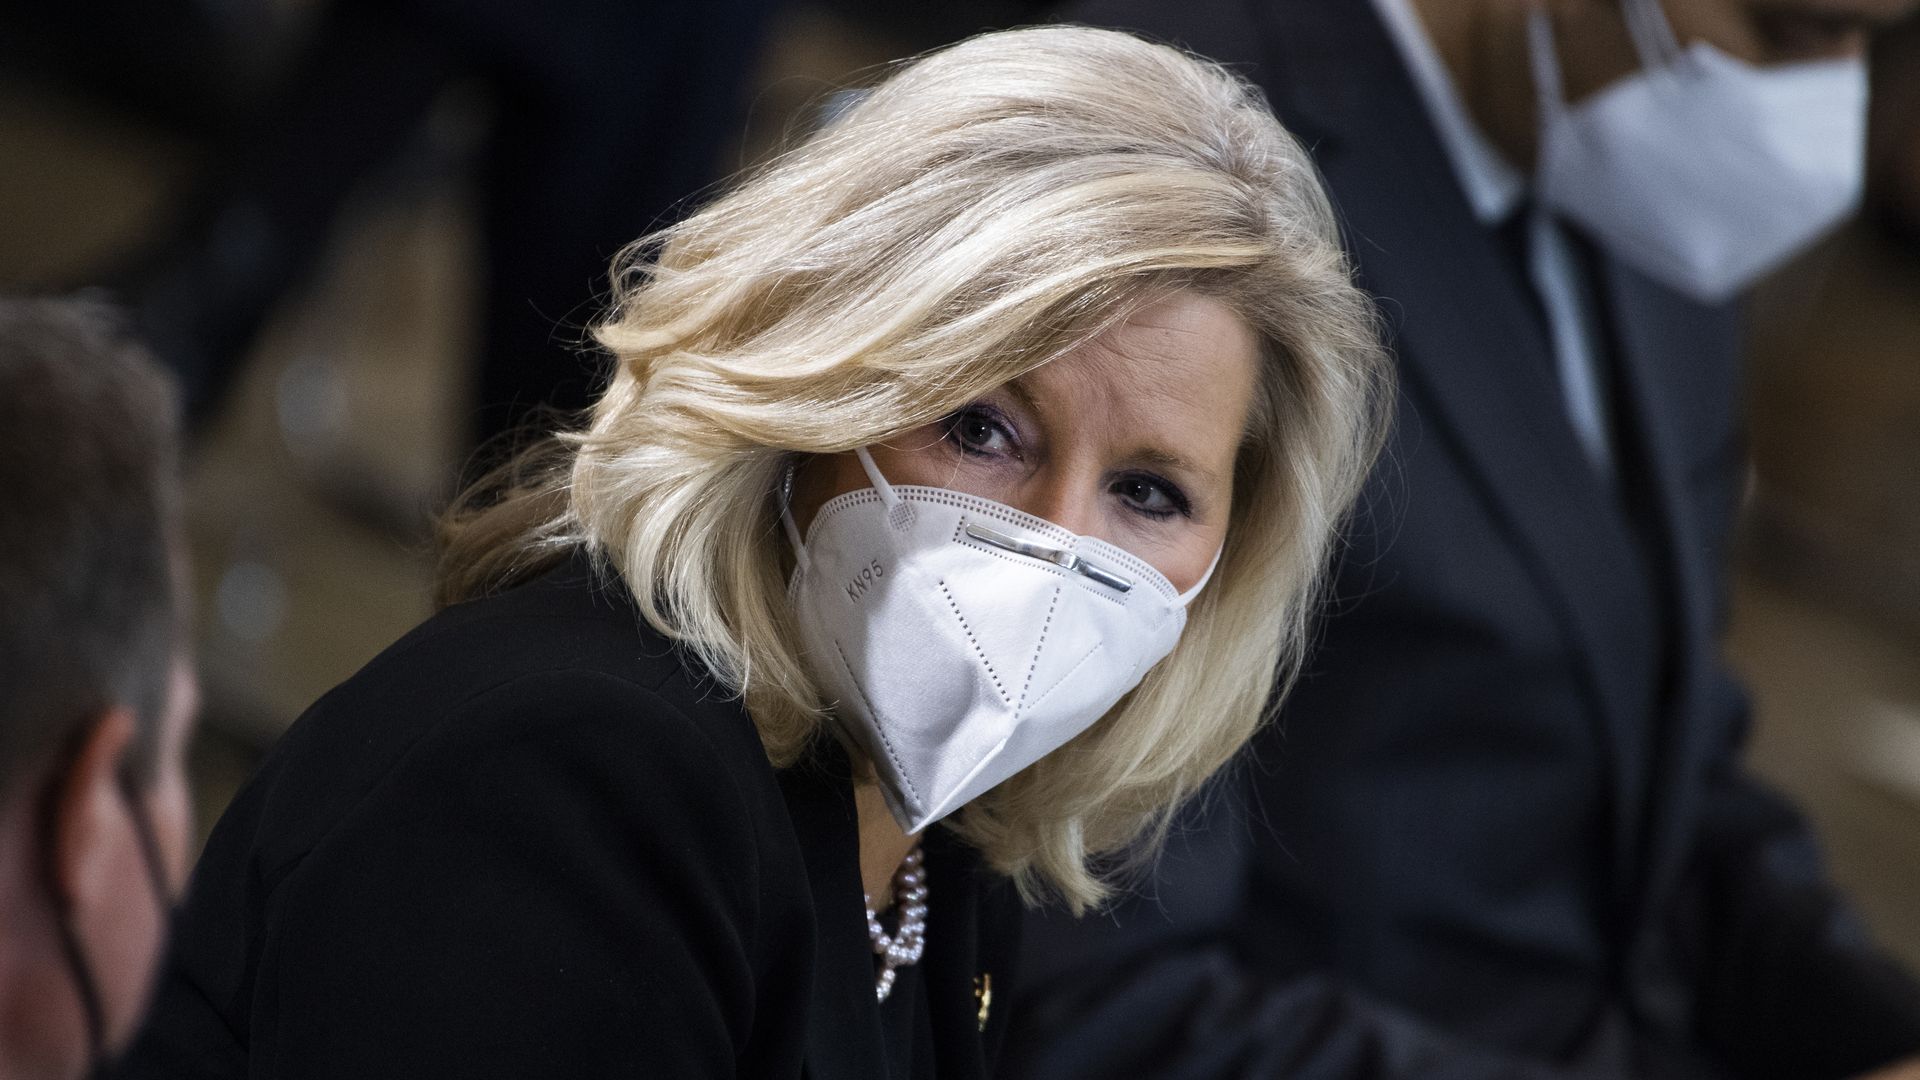 Photo of Liz Cheney wearing a mask and looking over at someone